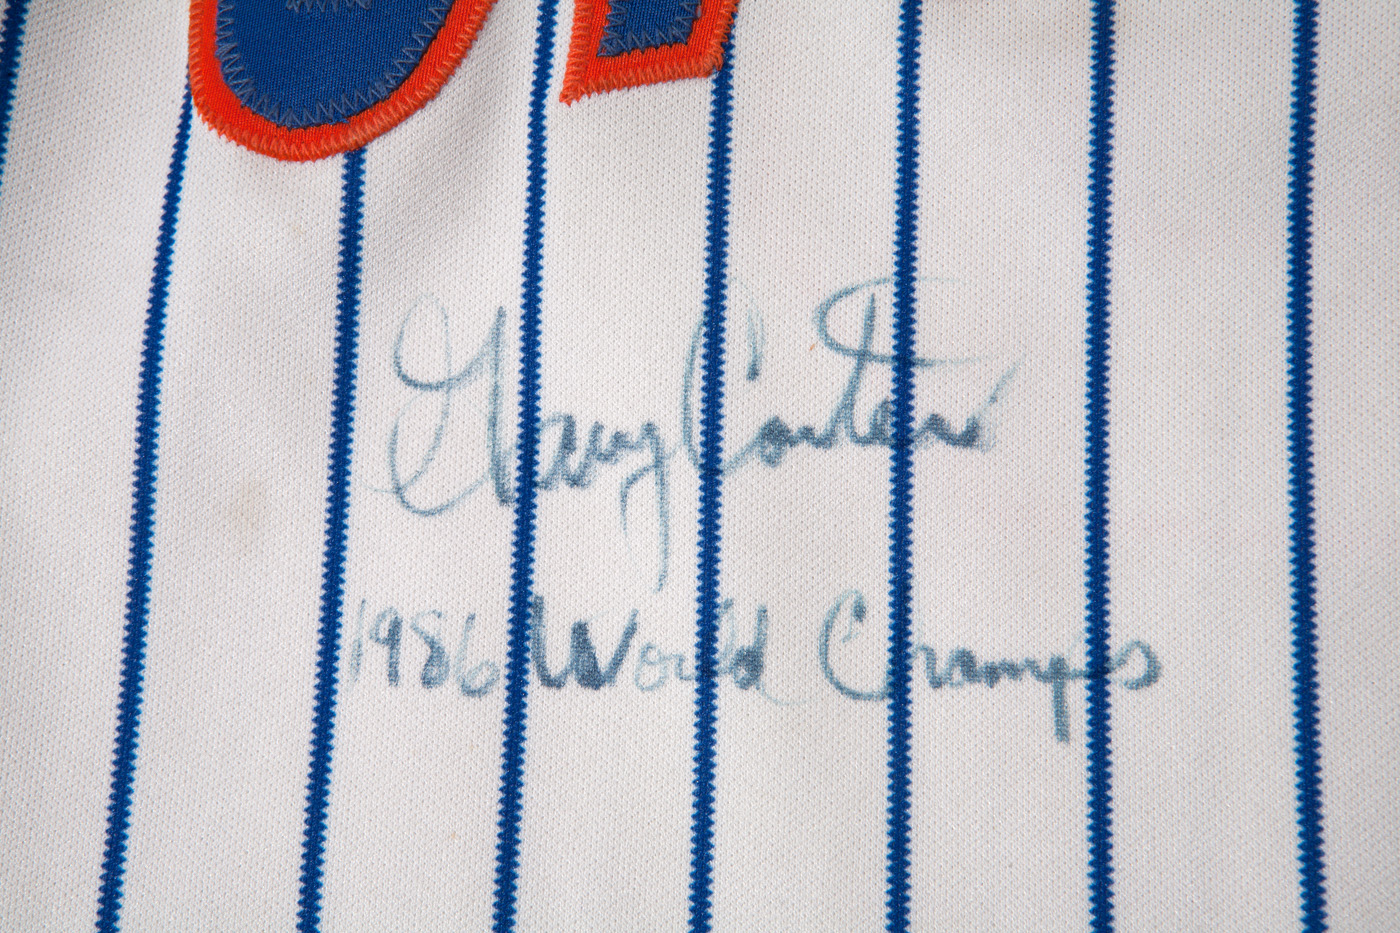 1986 New York Mets World Series Champs Team Signed Game Jersey - 1986 New  York Mets World Series Champs Team Signed Game Jersey - Rafael Osona  Auctions Nantucket, MA